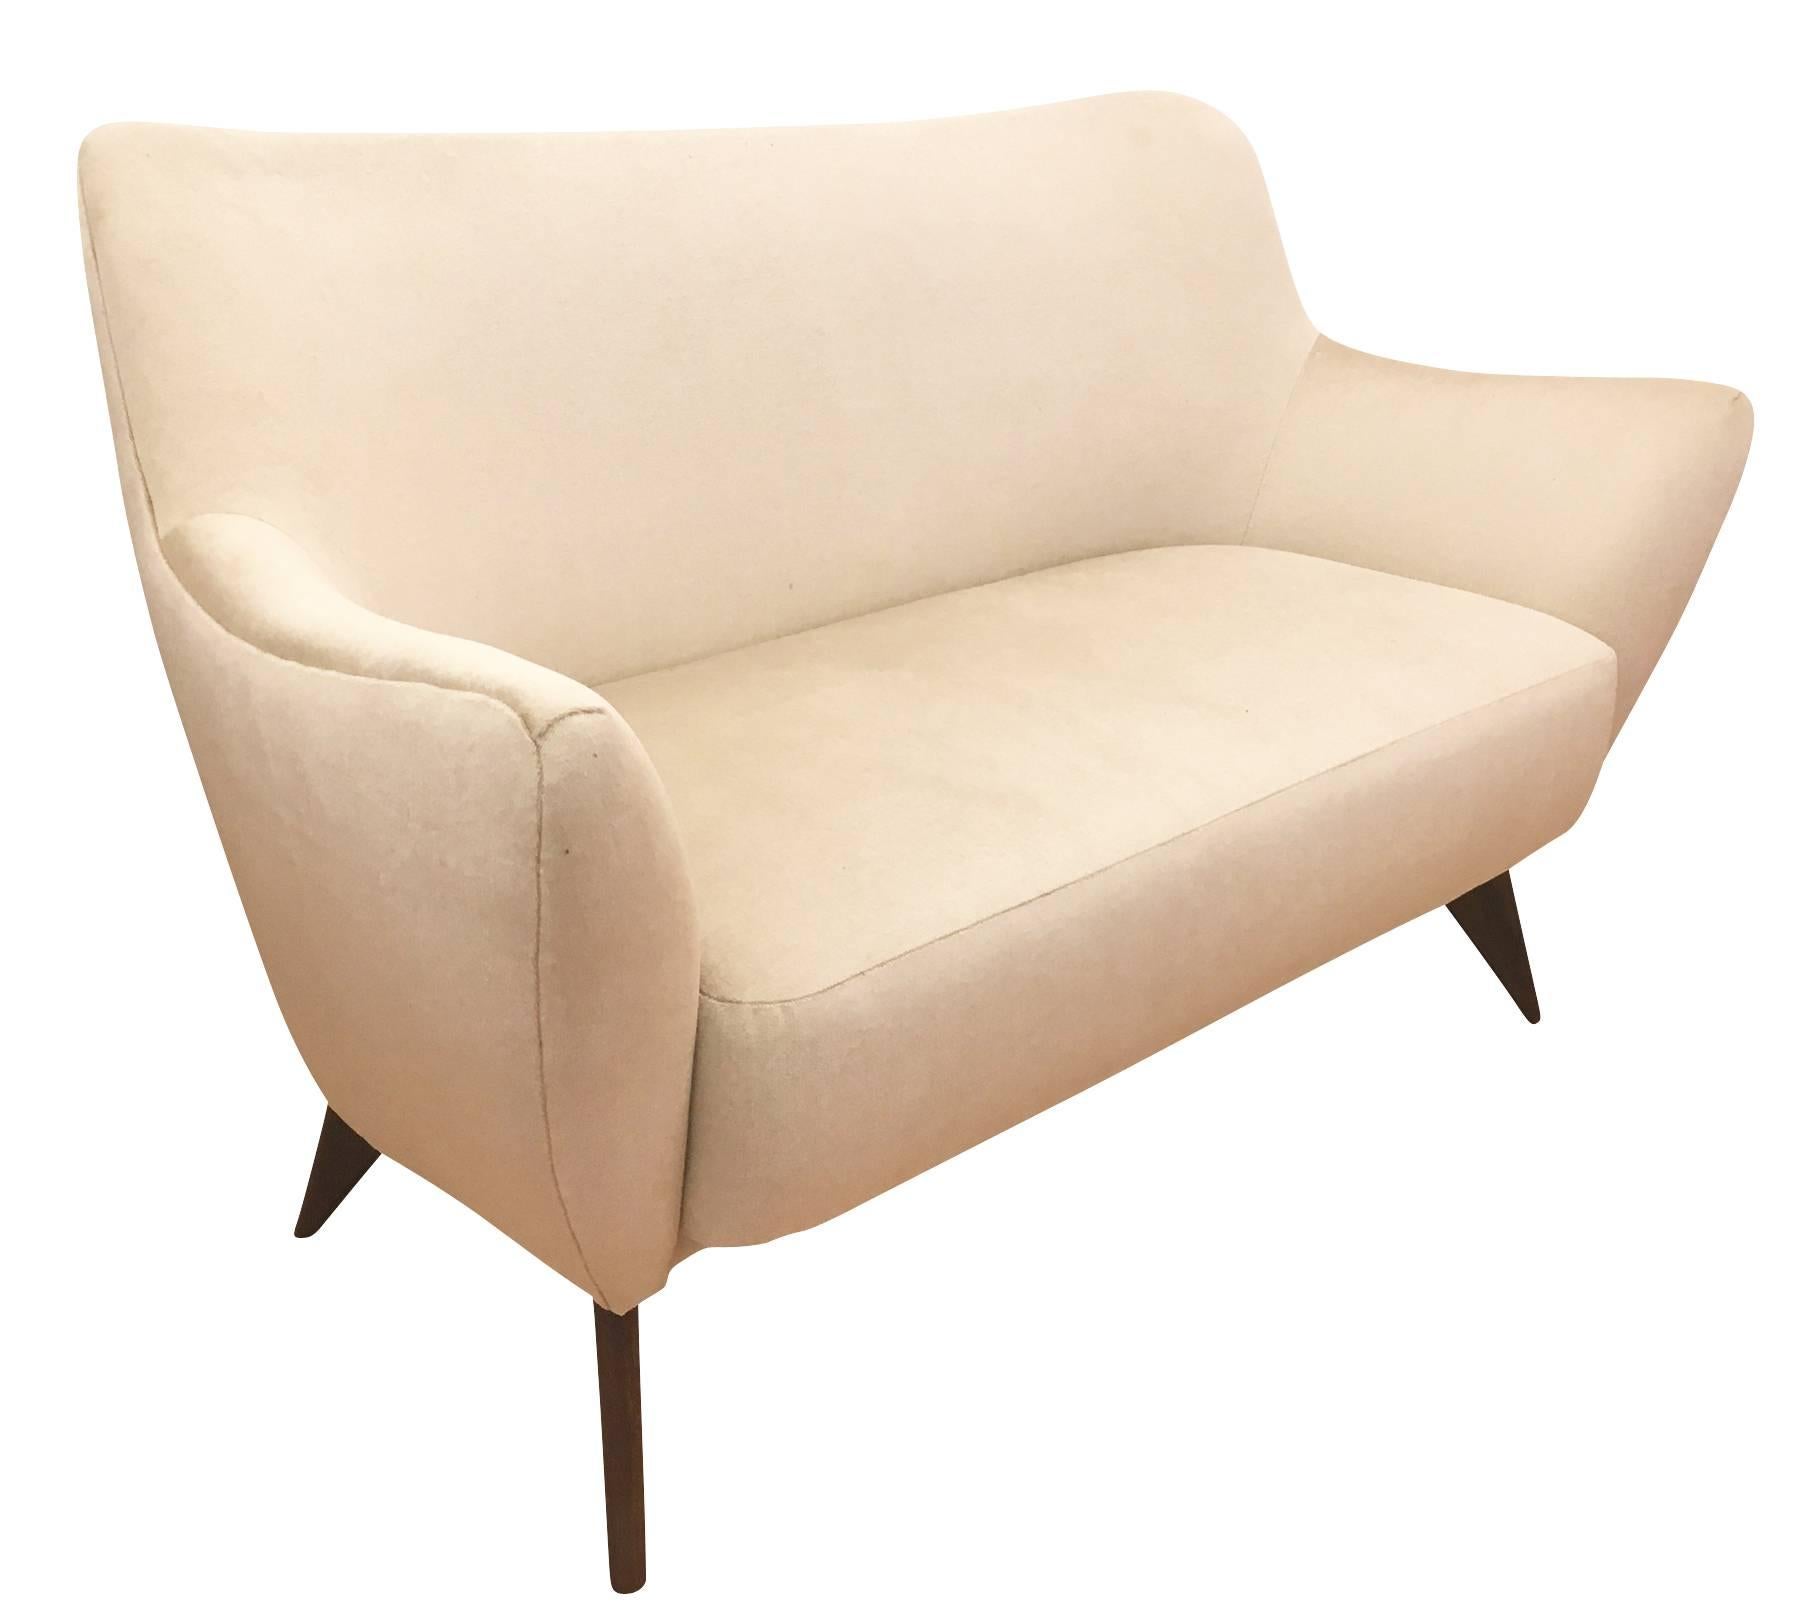 Beautifully designed and balanced “Perla” sofa by Guglielmo Veronesi for ISA from the 1950s. Its curved lines and tapered wooden legs give it a sensual and modern feel. Has been re-upholstered in a pearl velvet.

Available for viewing at Gaspare